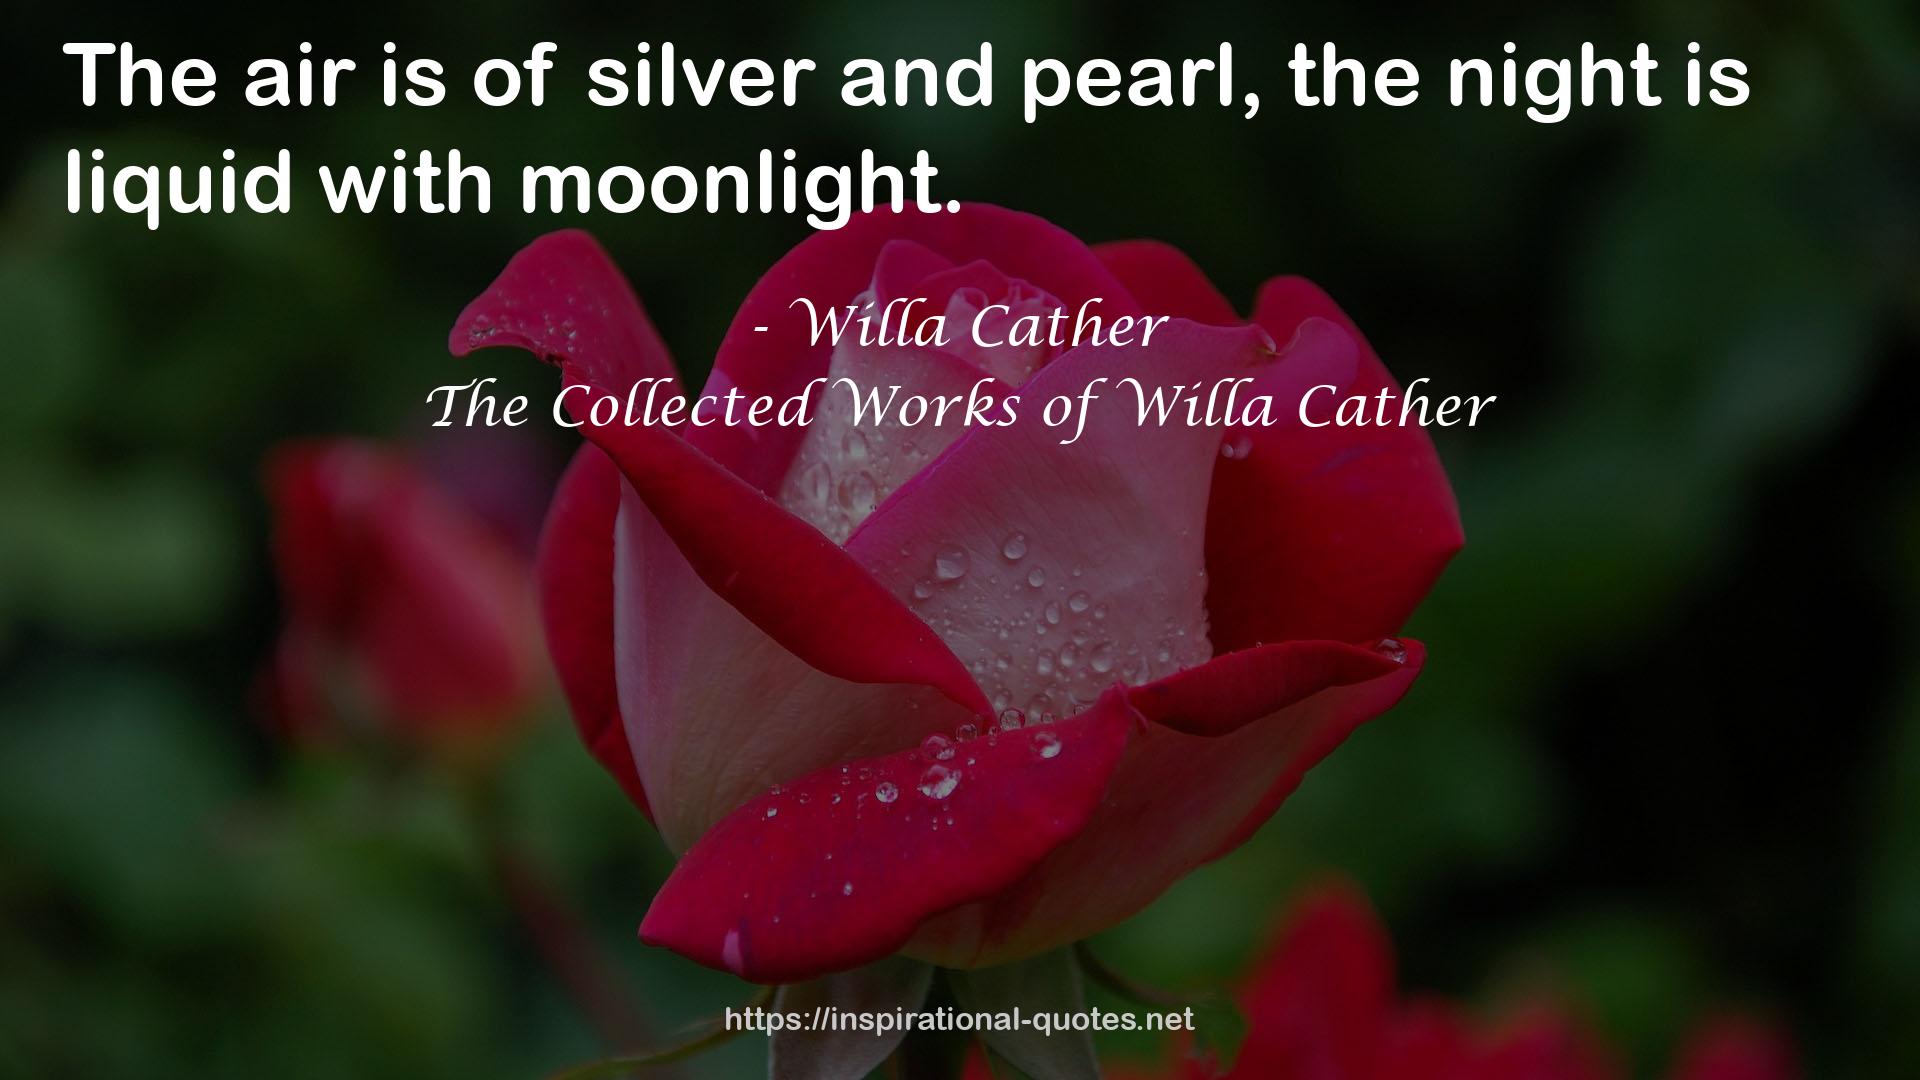 The Collected Works of Willa Cather QUOTES